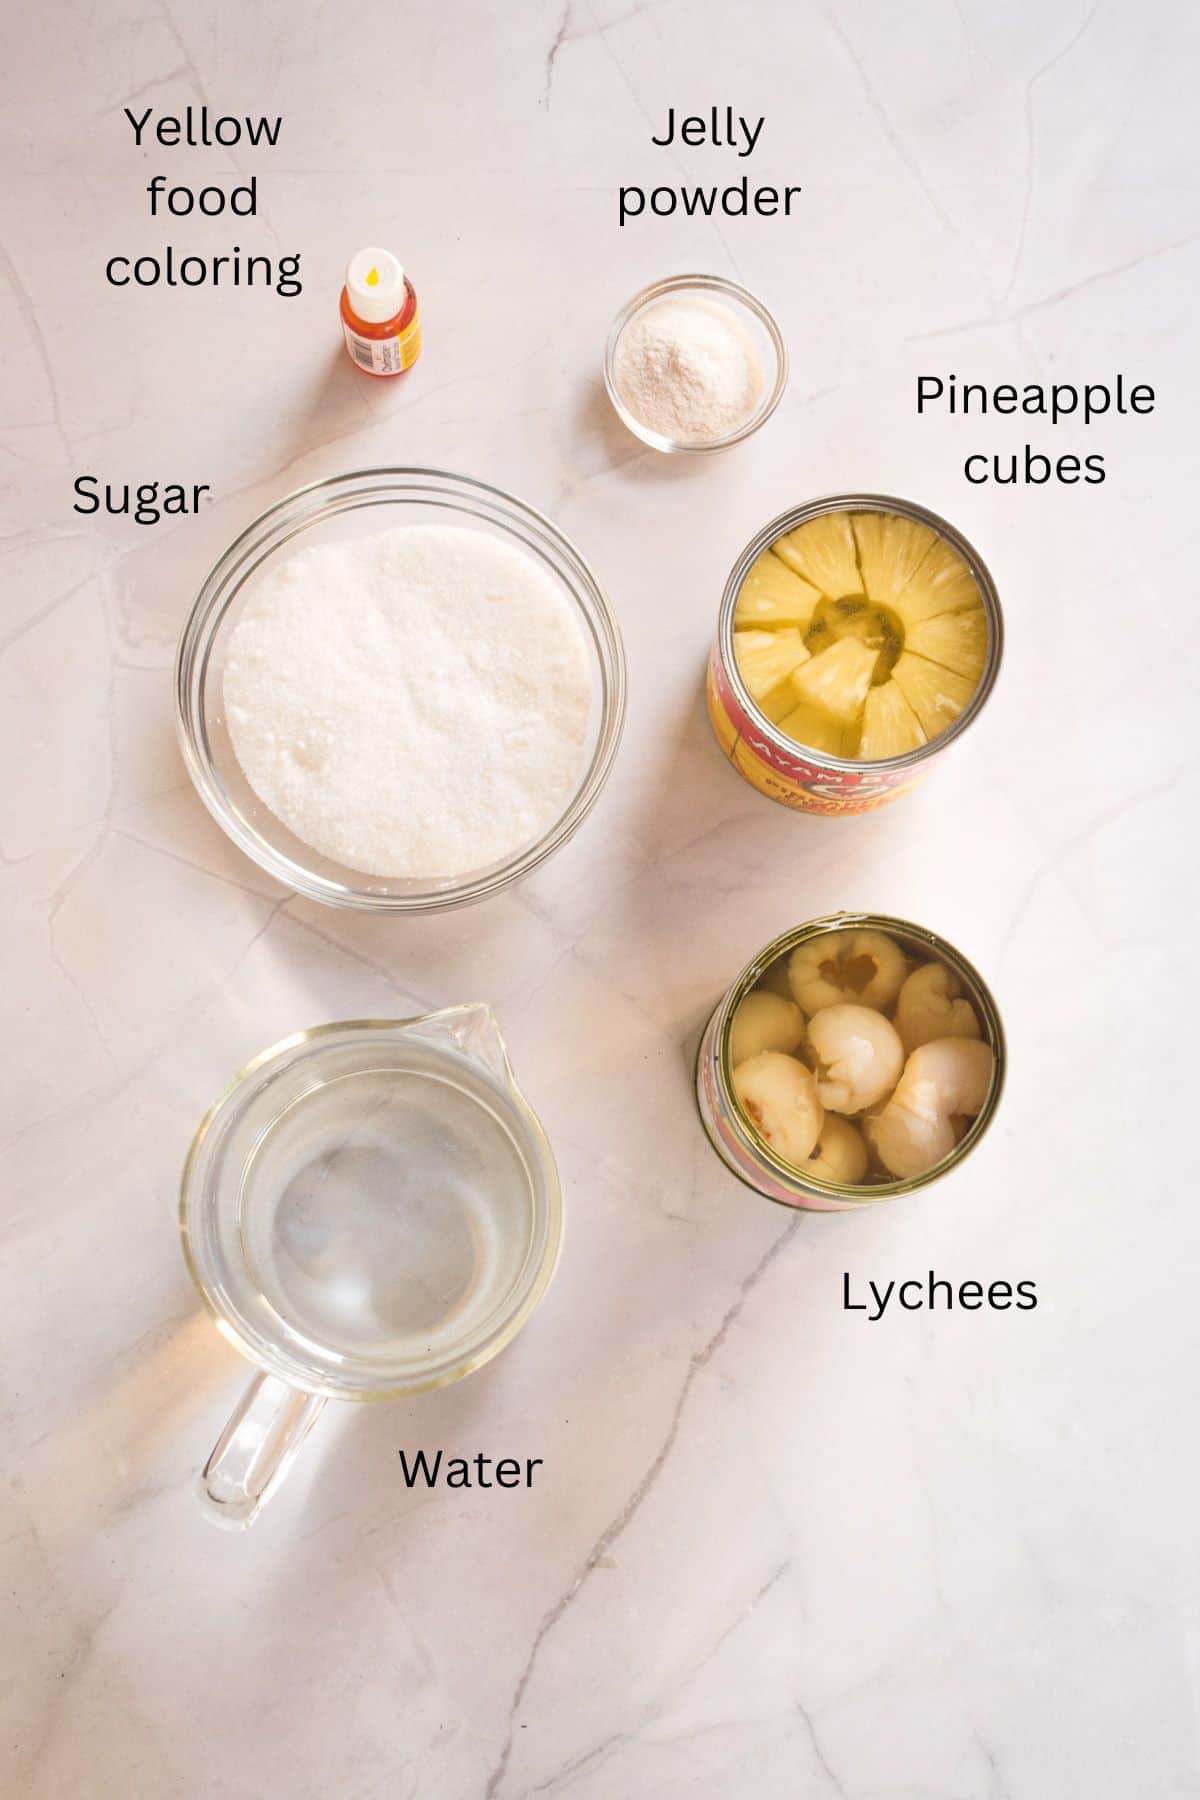 Lychees, pineapple cubes, water, sugar, jelly powder and yellow food coloring against a marble background.